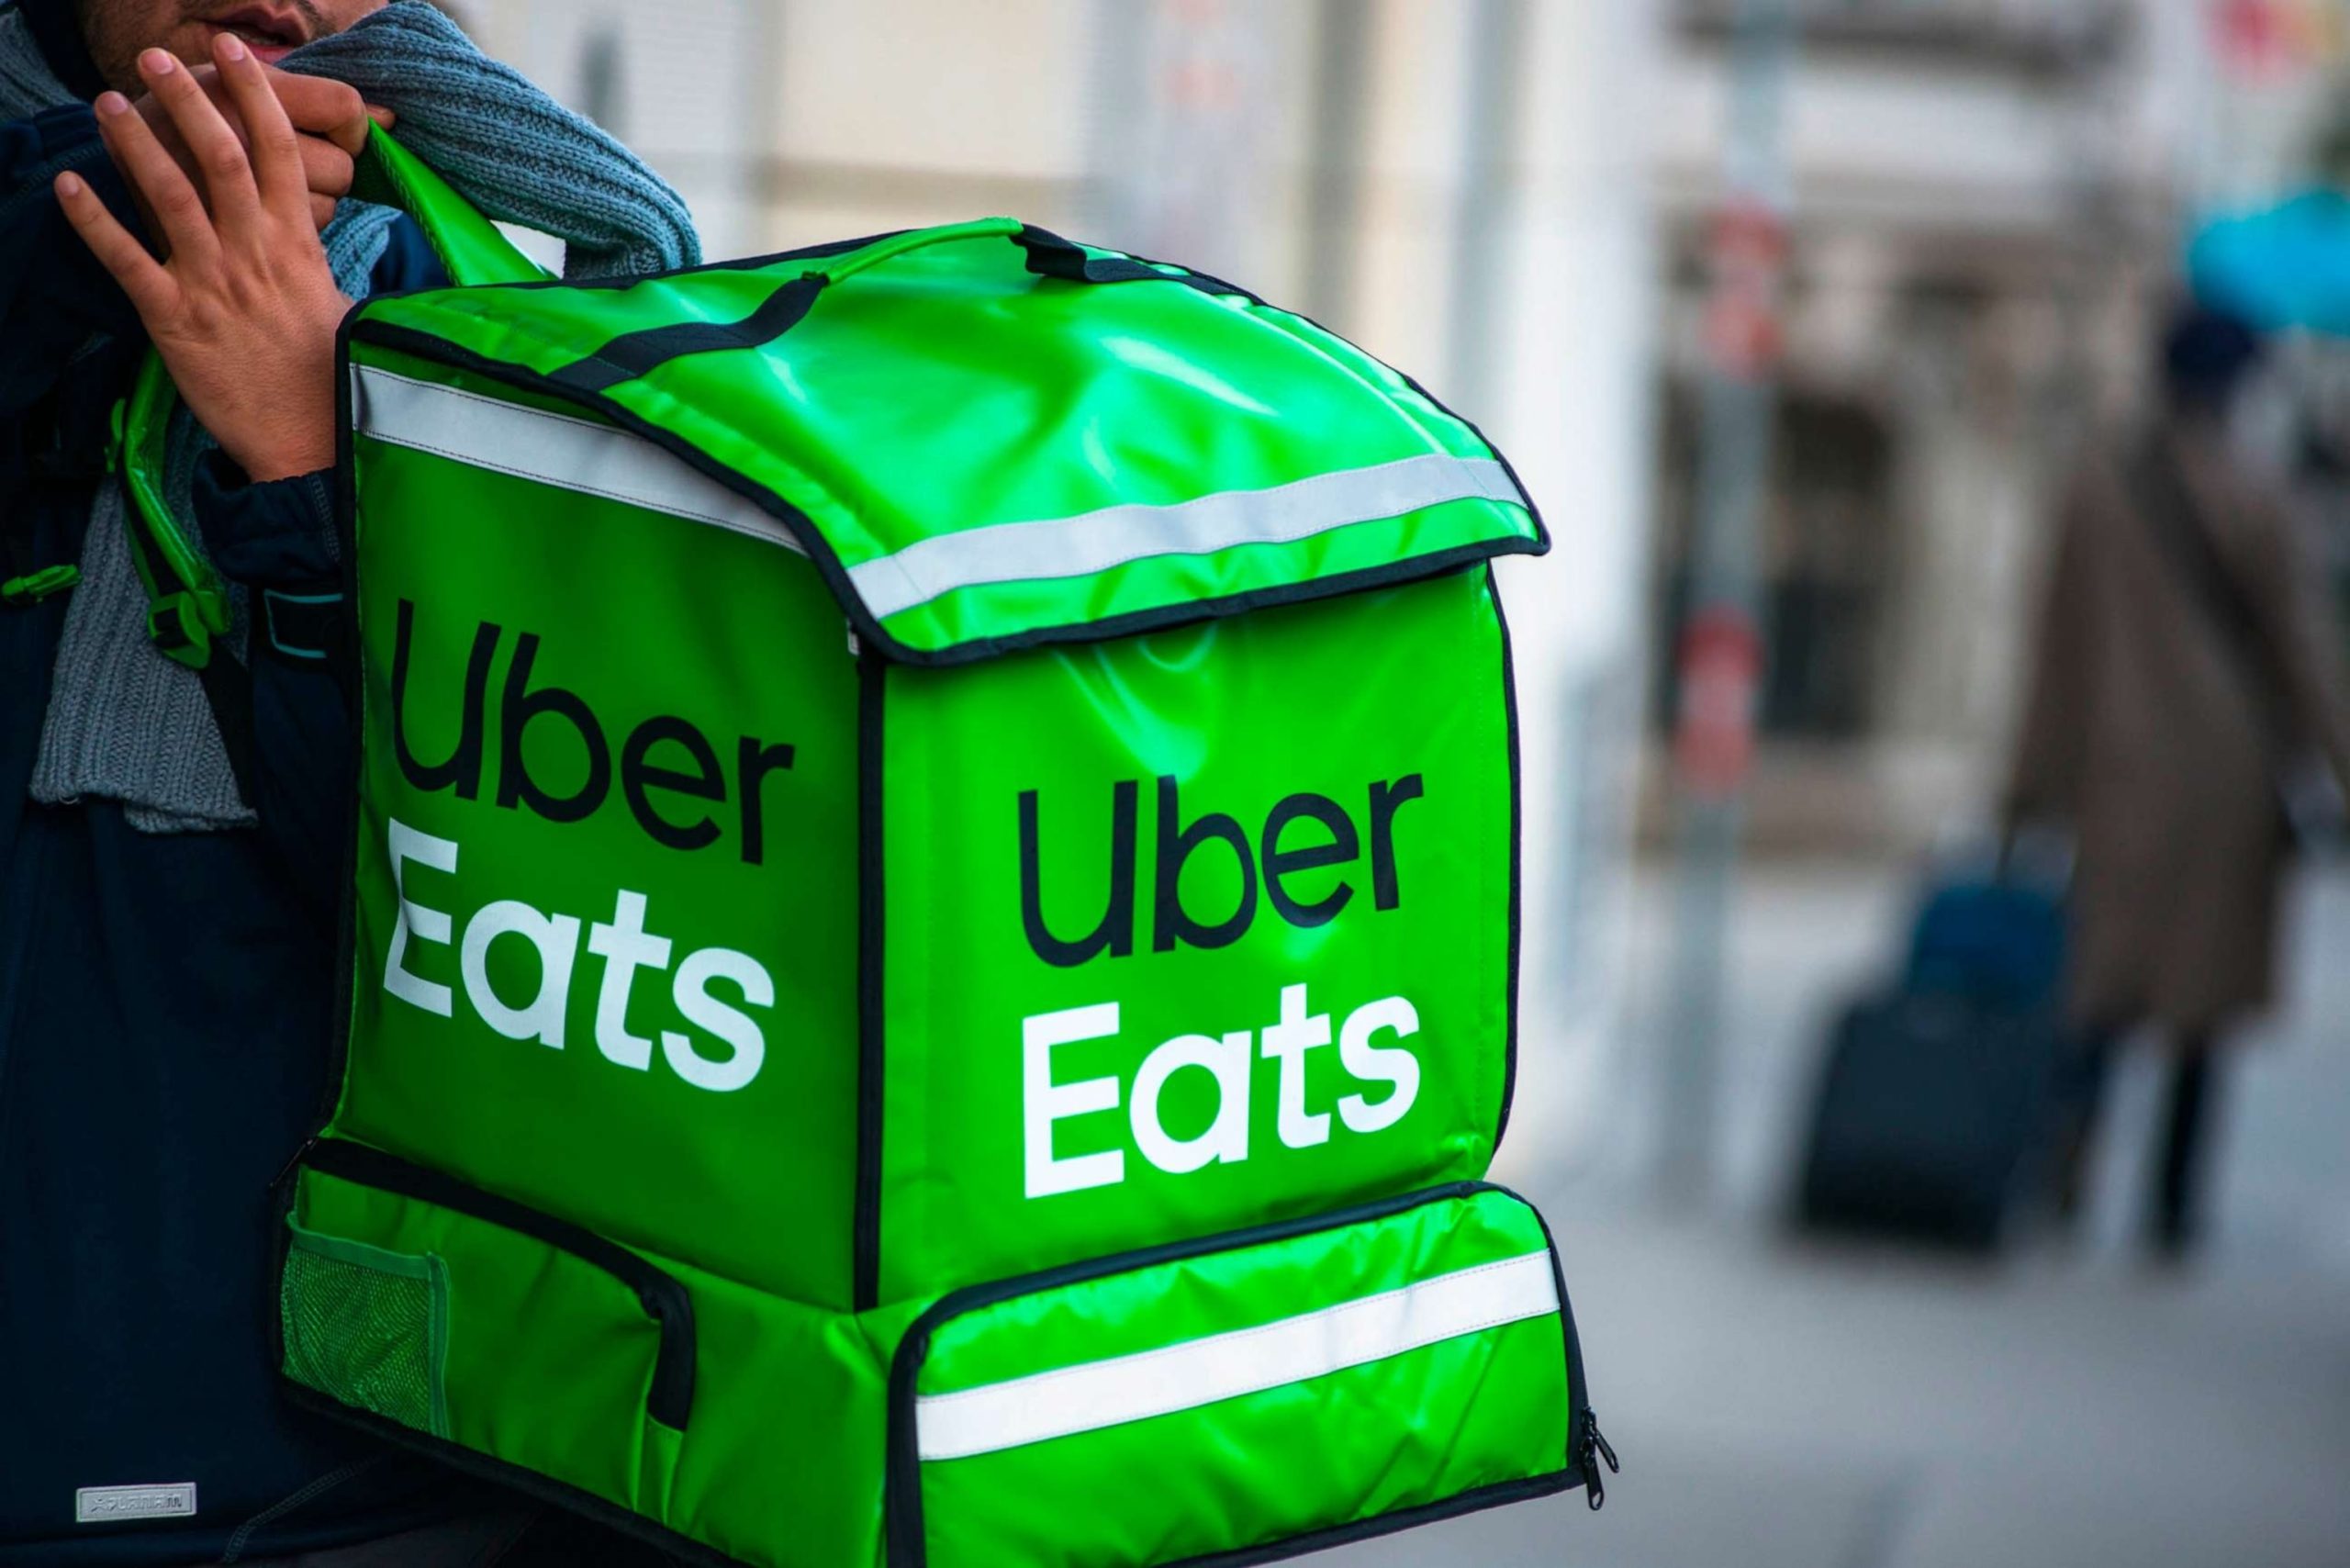 Instacart's Announcement Prompts Uber Eats to Accept SNAP Benefits for Grocery Purchases